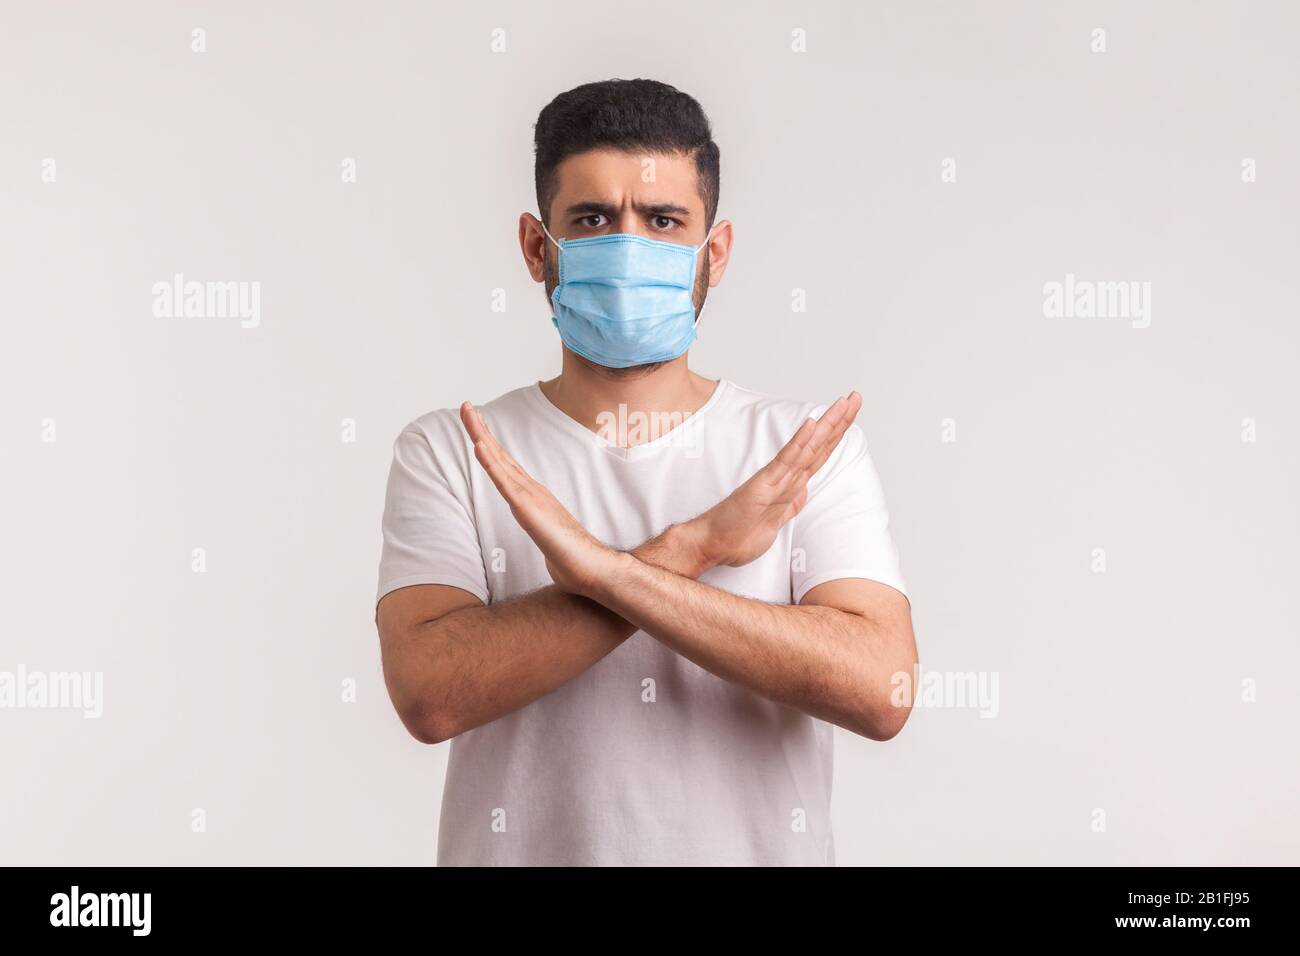 Man in protective hygienic mask standing with crossed arms, gesturing stop, warning of coronavirus epidemic, infection, respiratory diseases such as f Stock Photo